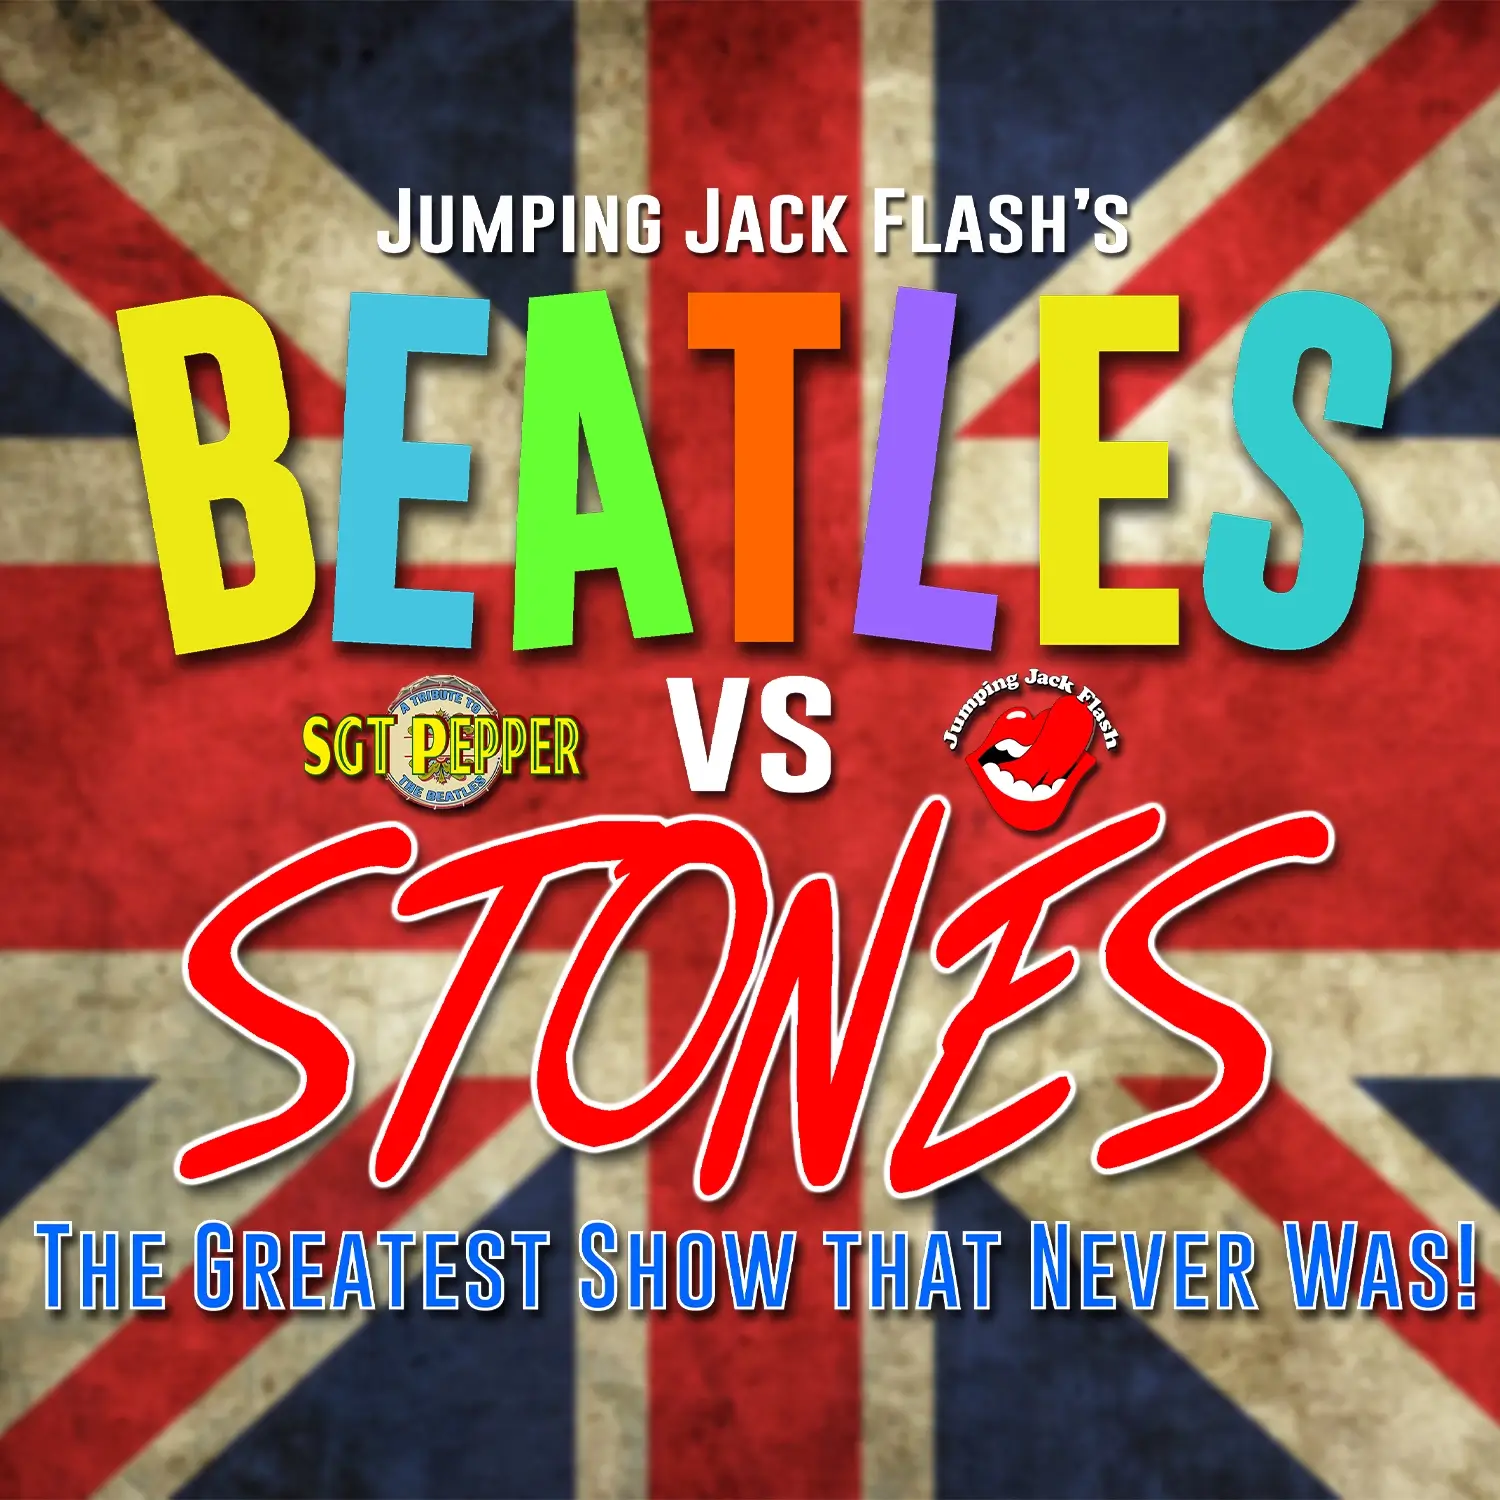 Beatles vs. Stones: the Greatest Show that Never Was!